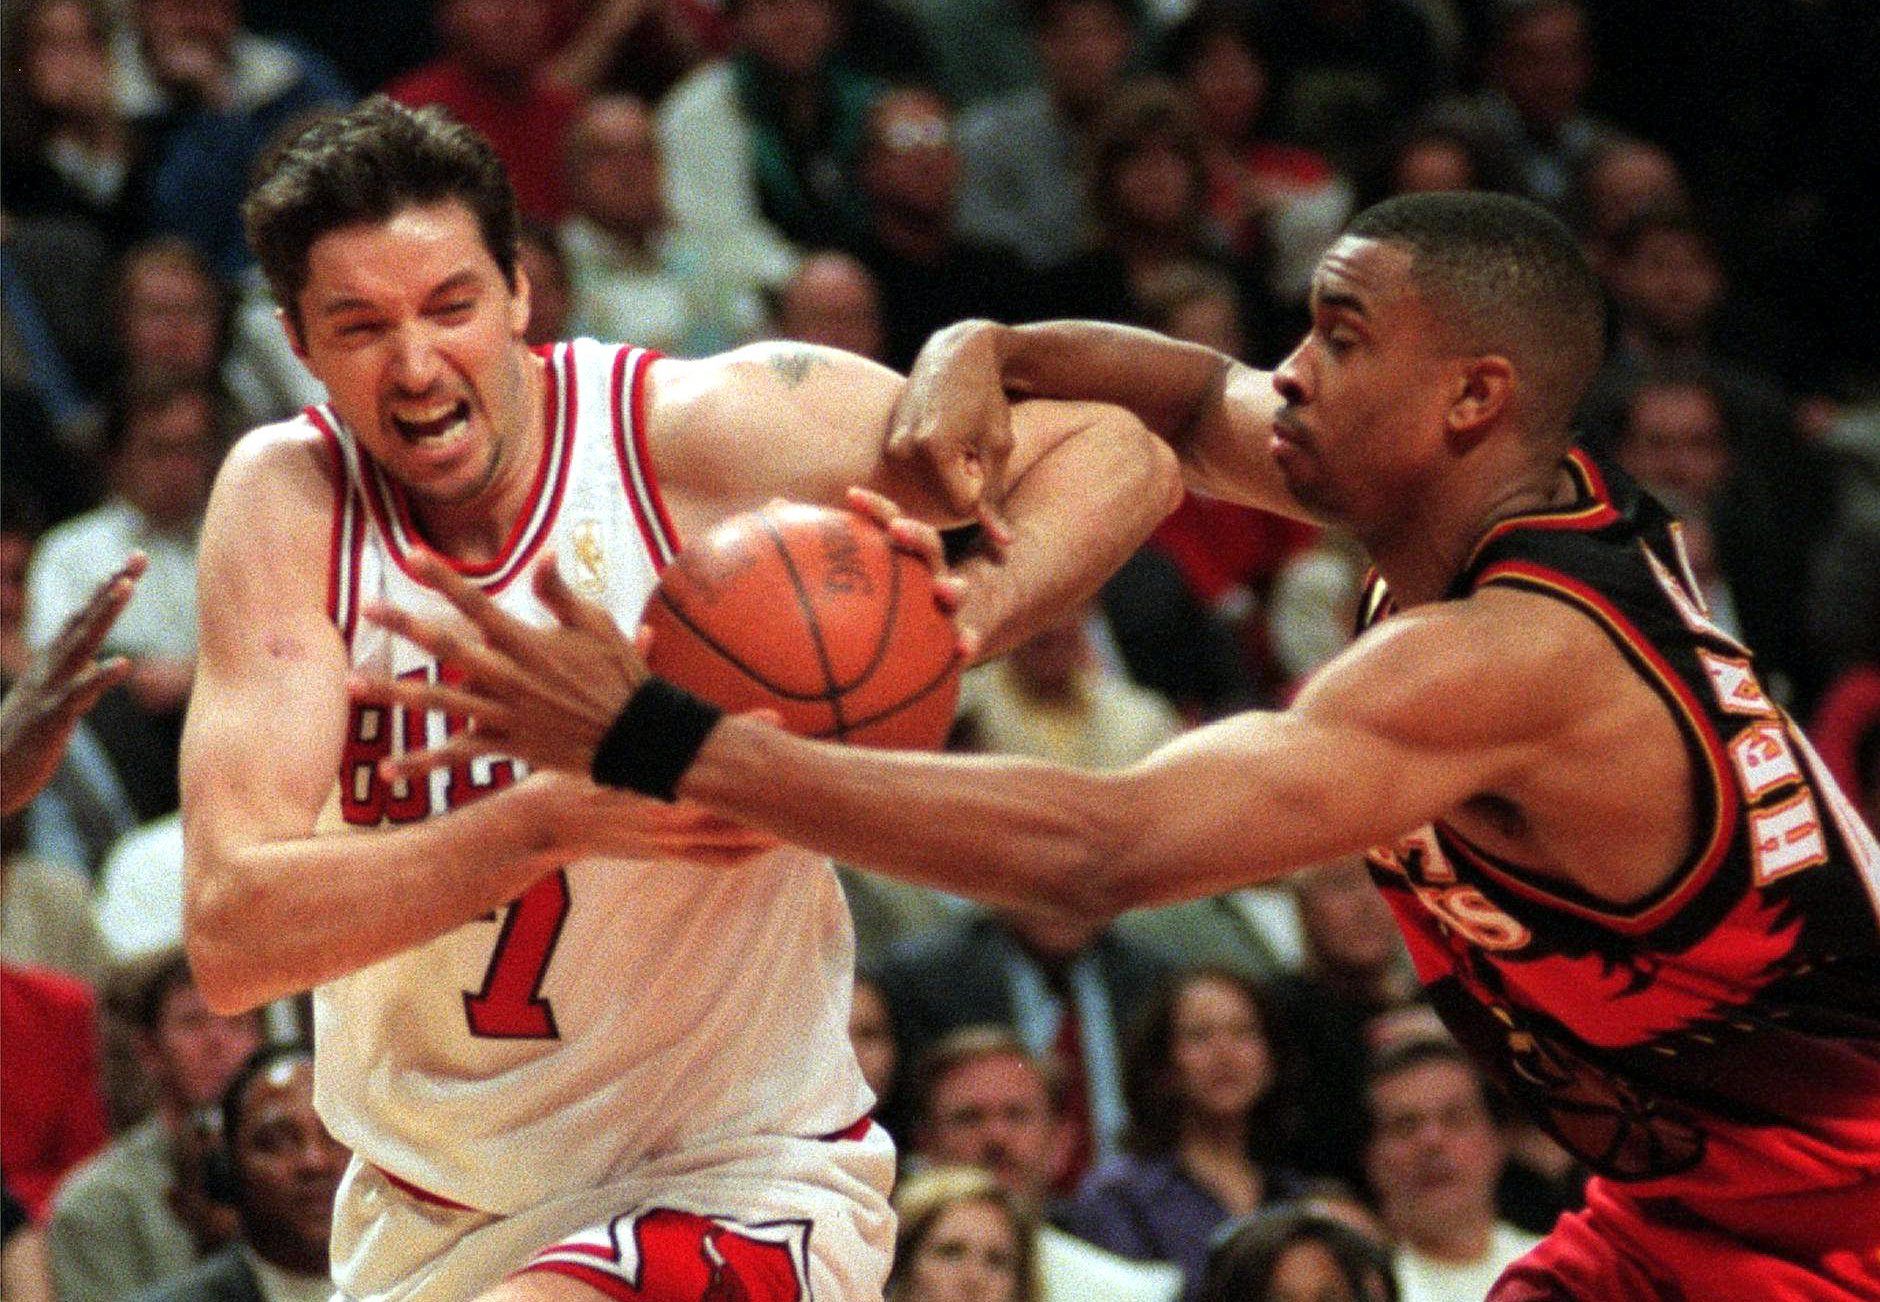 The Last Dance: Where Did Scottie Pippen Go After the Bulls